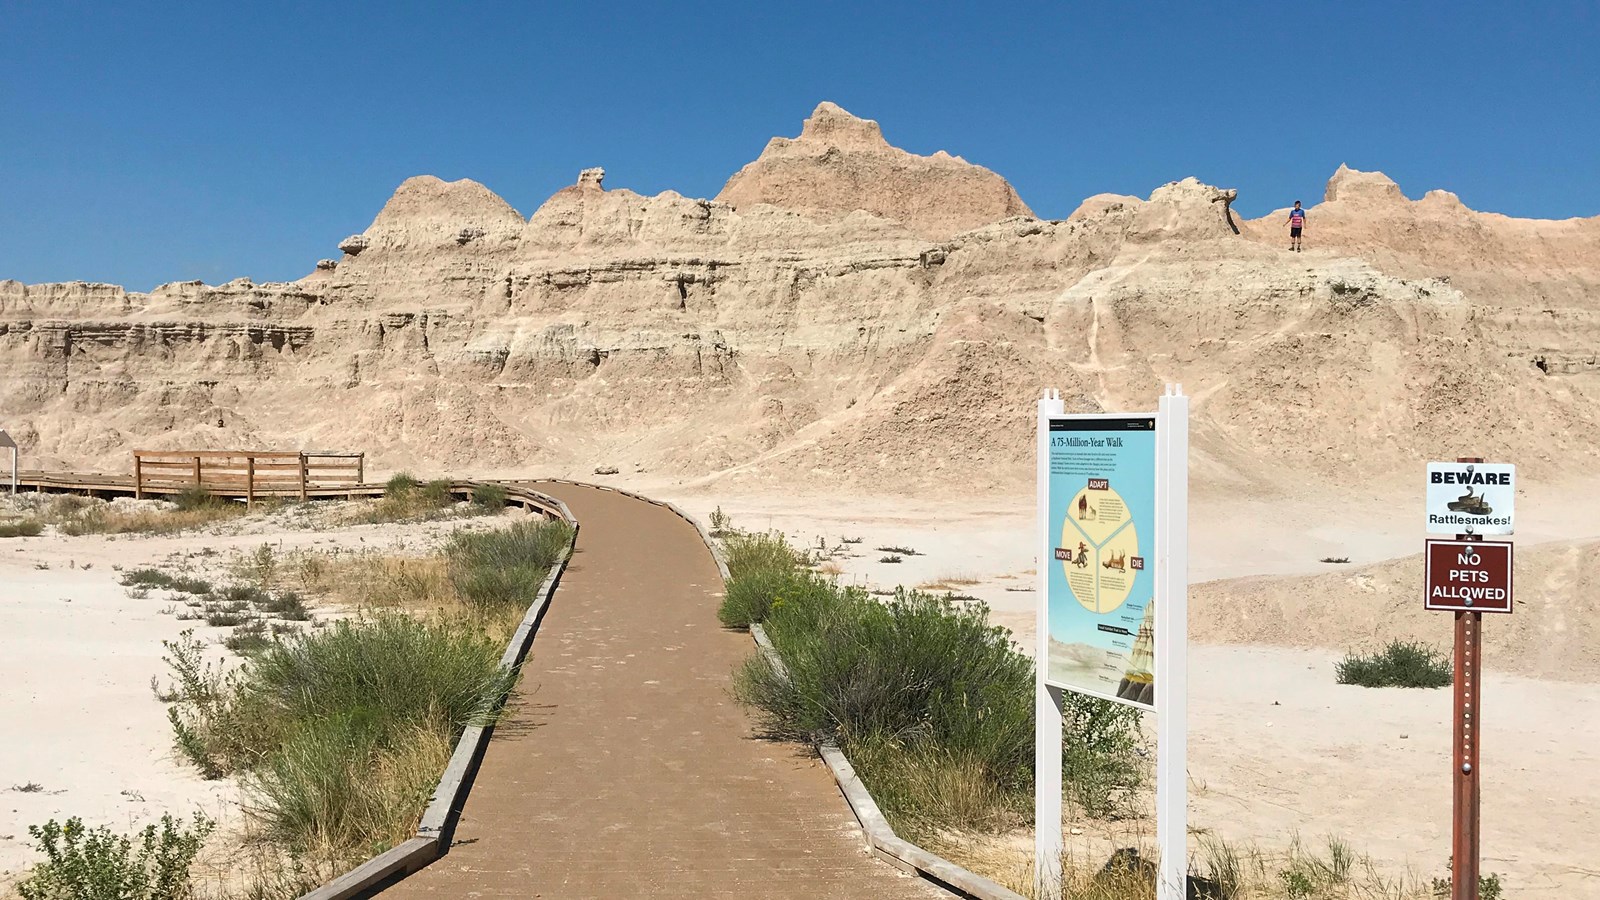 A boardwalk extends towards badlands formations under blue sky amid exhibit and rattlesnake sign.